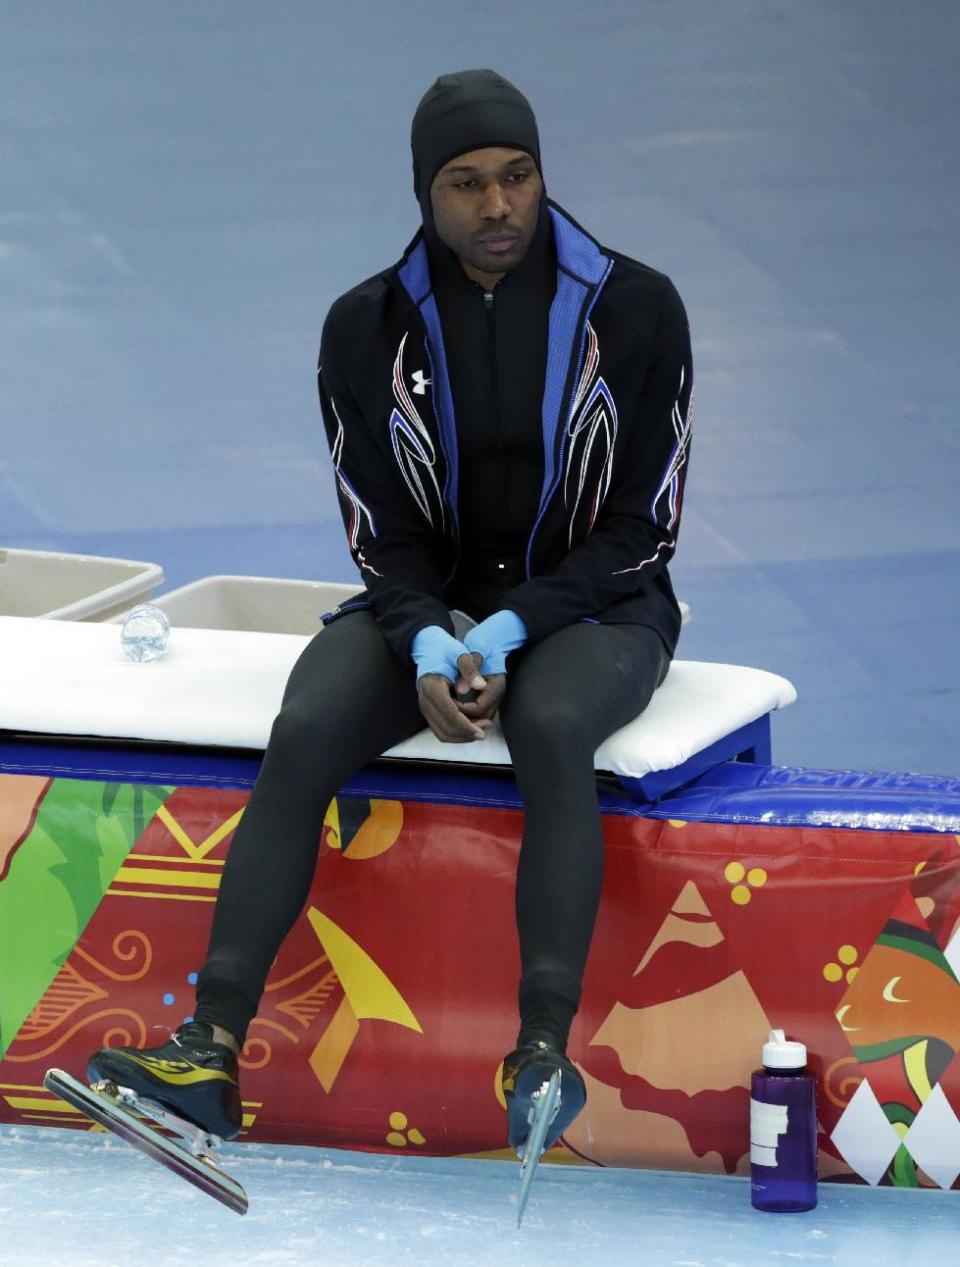 Shani Davis of the U.S. looks dejected after competing in the men's 1,500-meter speedskating race at the Adler Arena Skating Center during the 2014 Winter Olympics in in Sochi, Russia, Saturday, Feb. 15, 2014. (AP Photo/Matt Dunham)